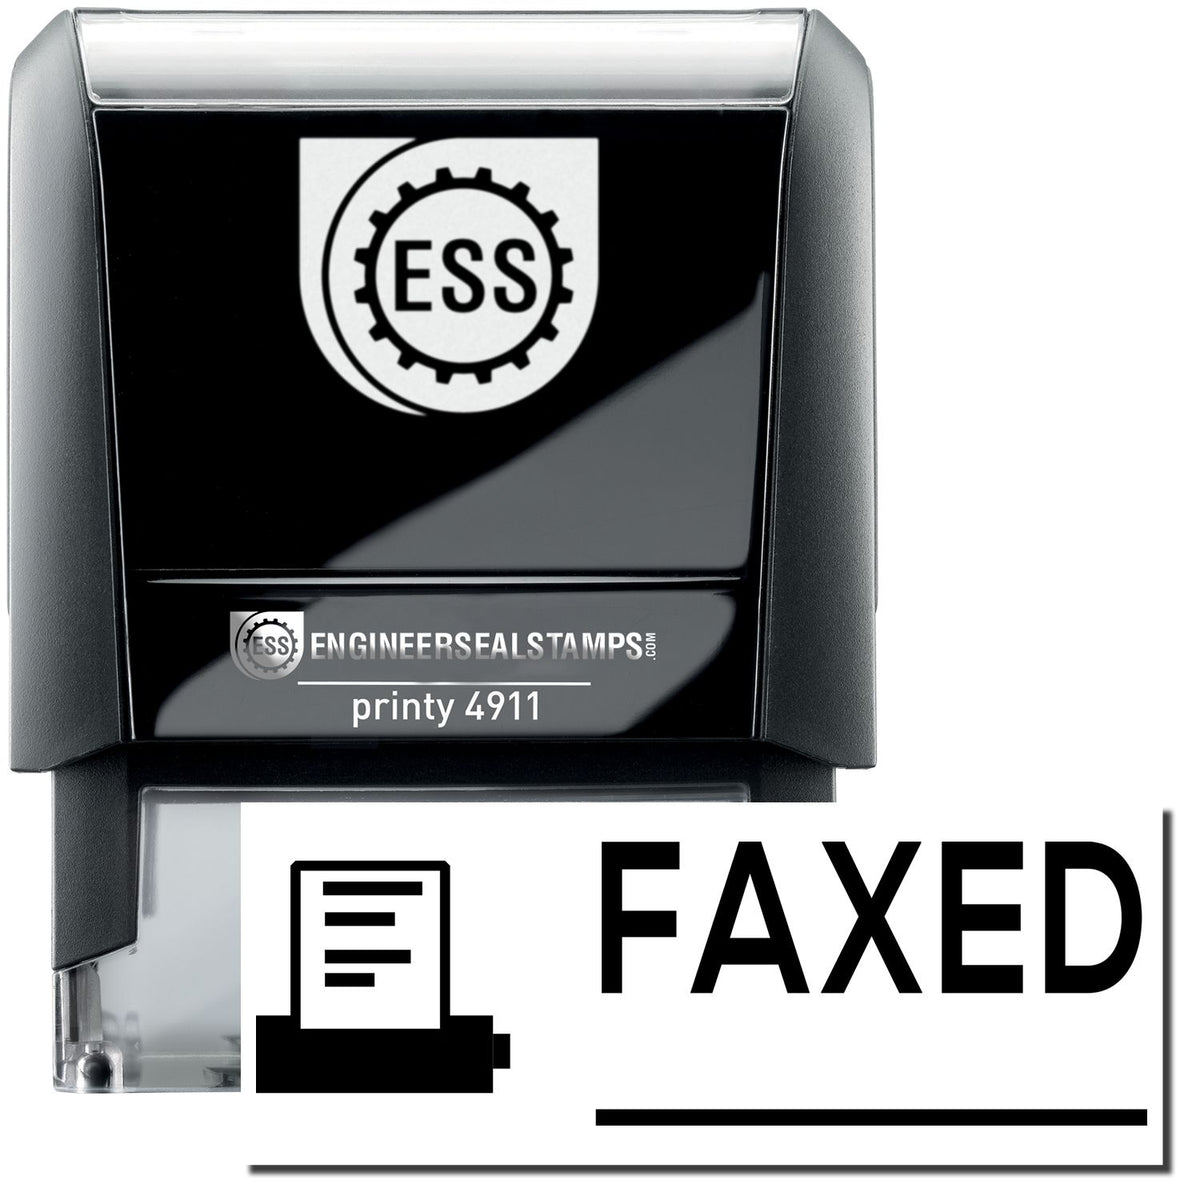 A self-inking stamp with a stamped image showing how the text &quot;FAXED&quot; with a small image of a fax machine on the left and a line underneath the text is displayed after stamping.